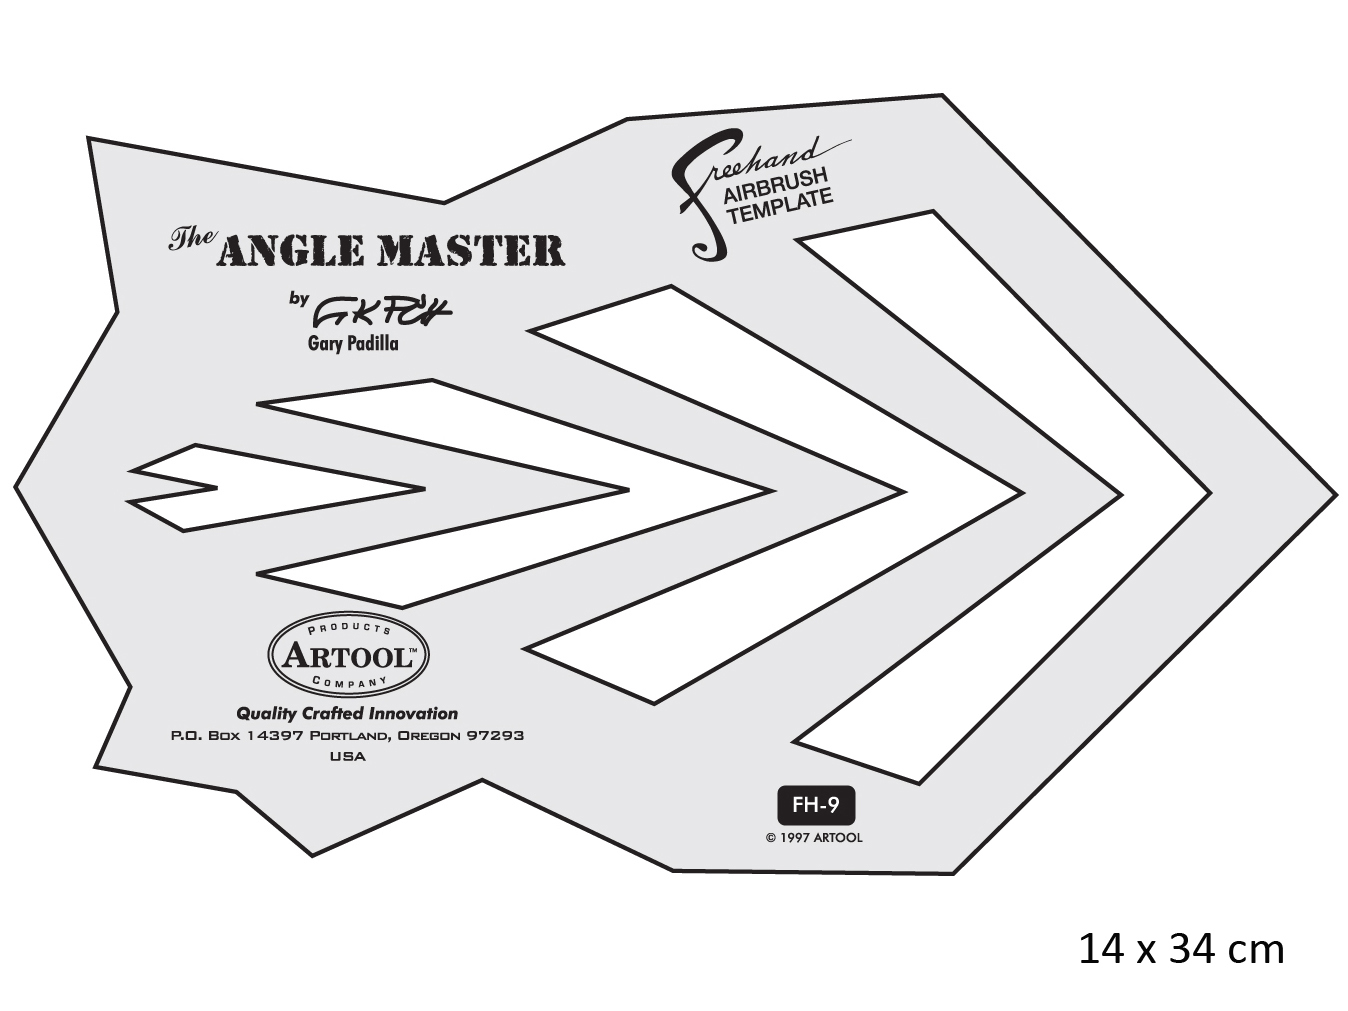 ARTOOL FH 9 SP The Angle Master Freehand Airbrush Template by Gary Padilla